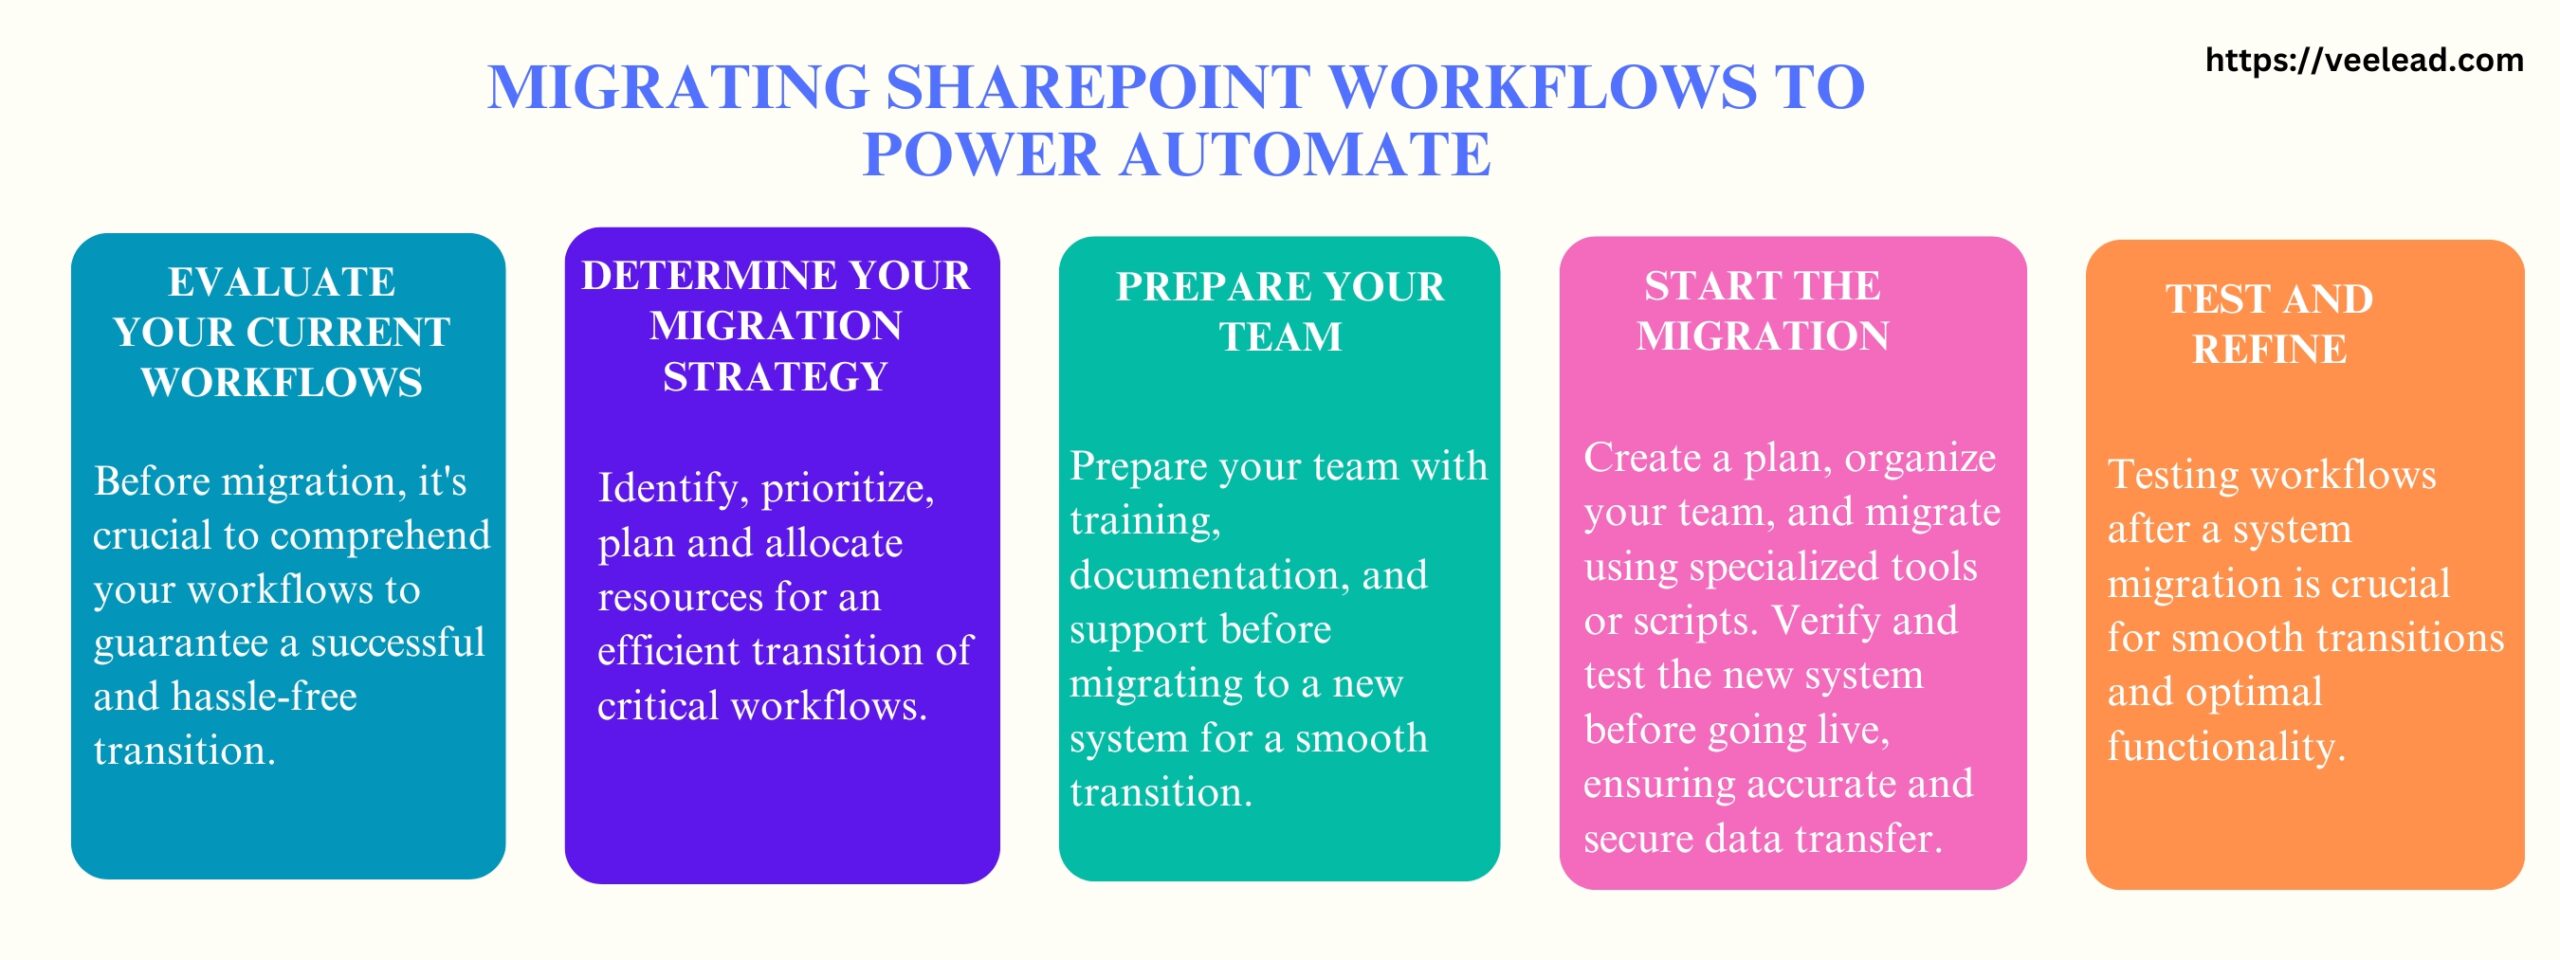 SharePoint 2013 workflows to Power Automate workflows